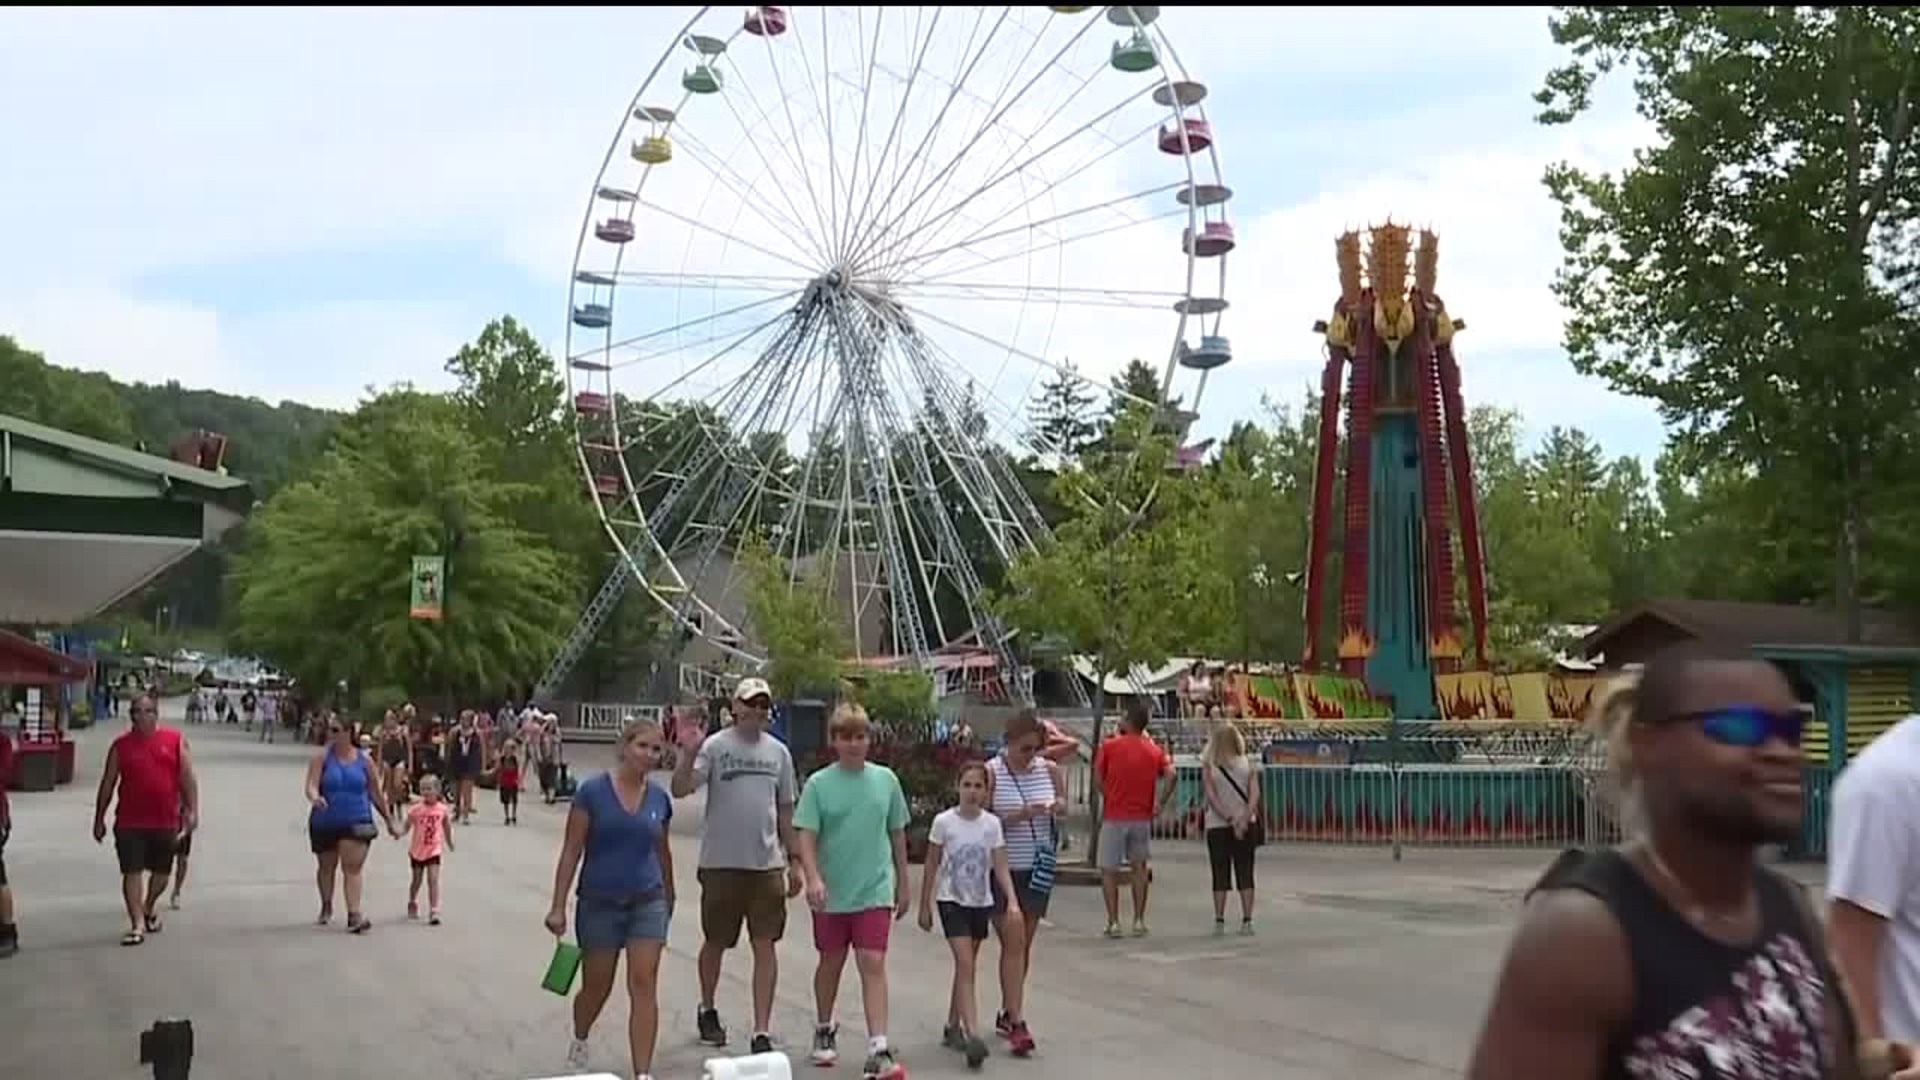 Knoebels Open Again after Rainy Week